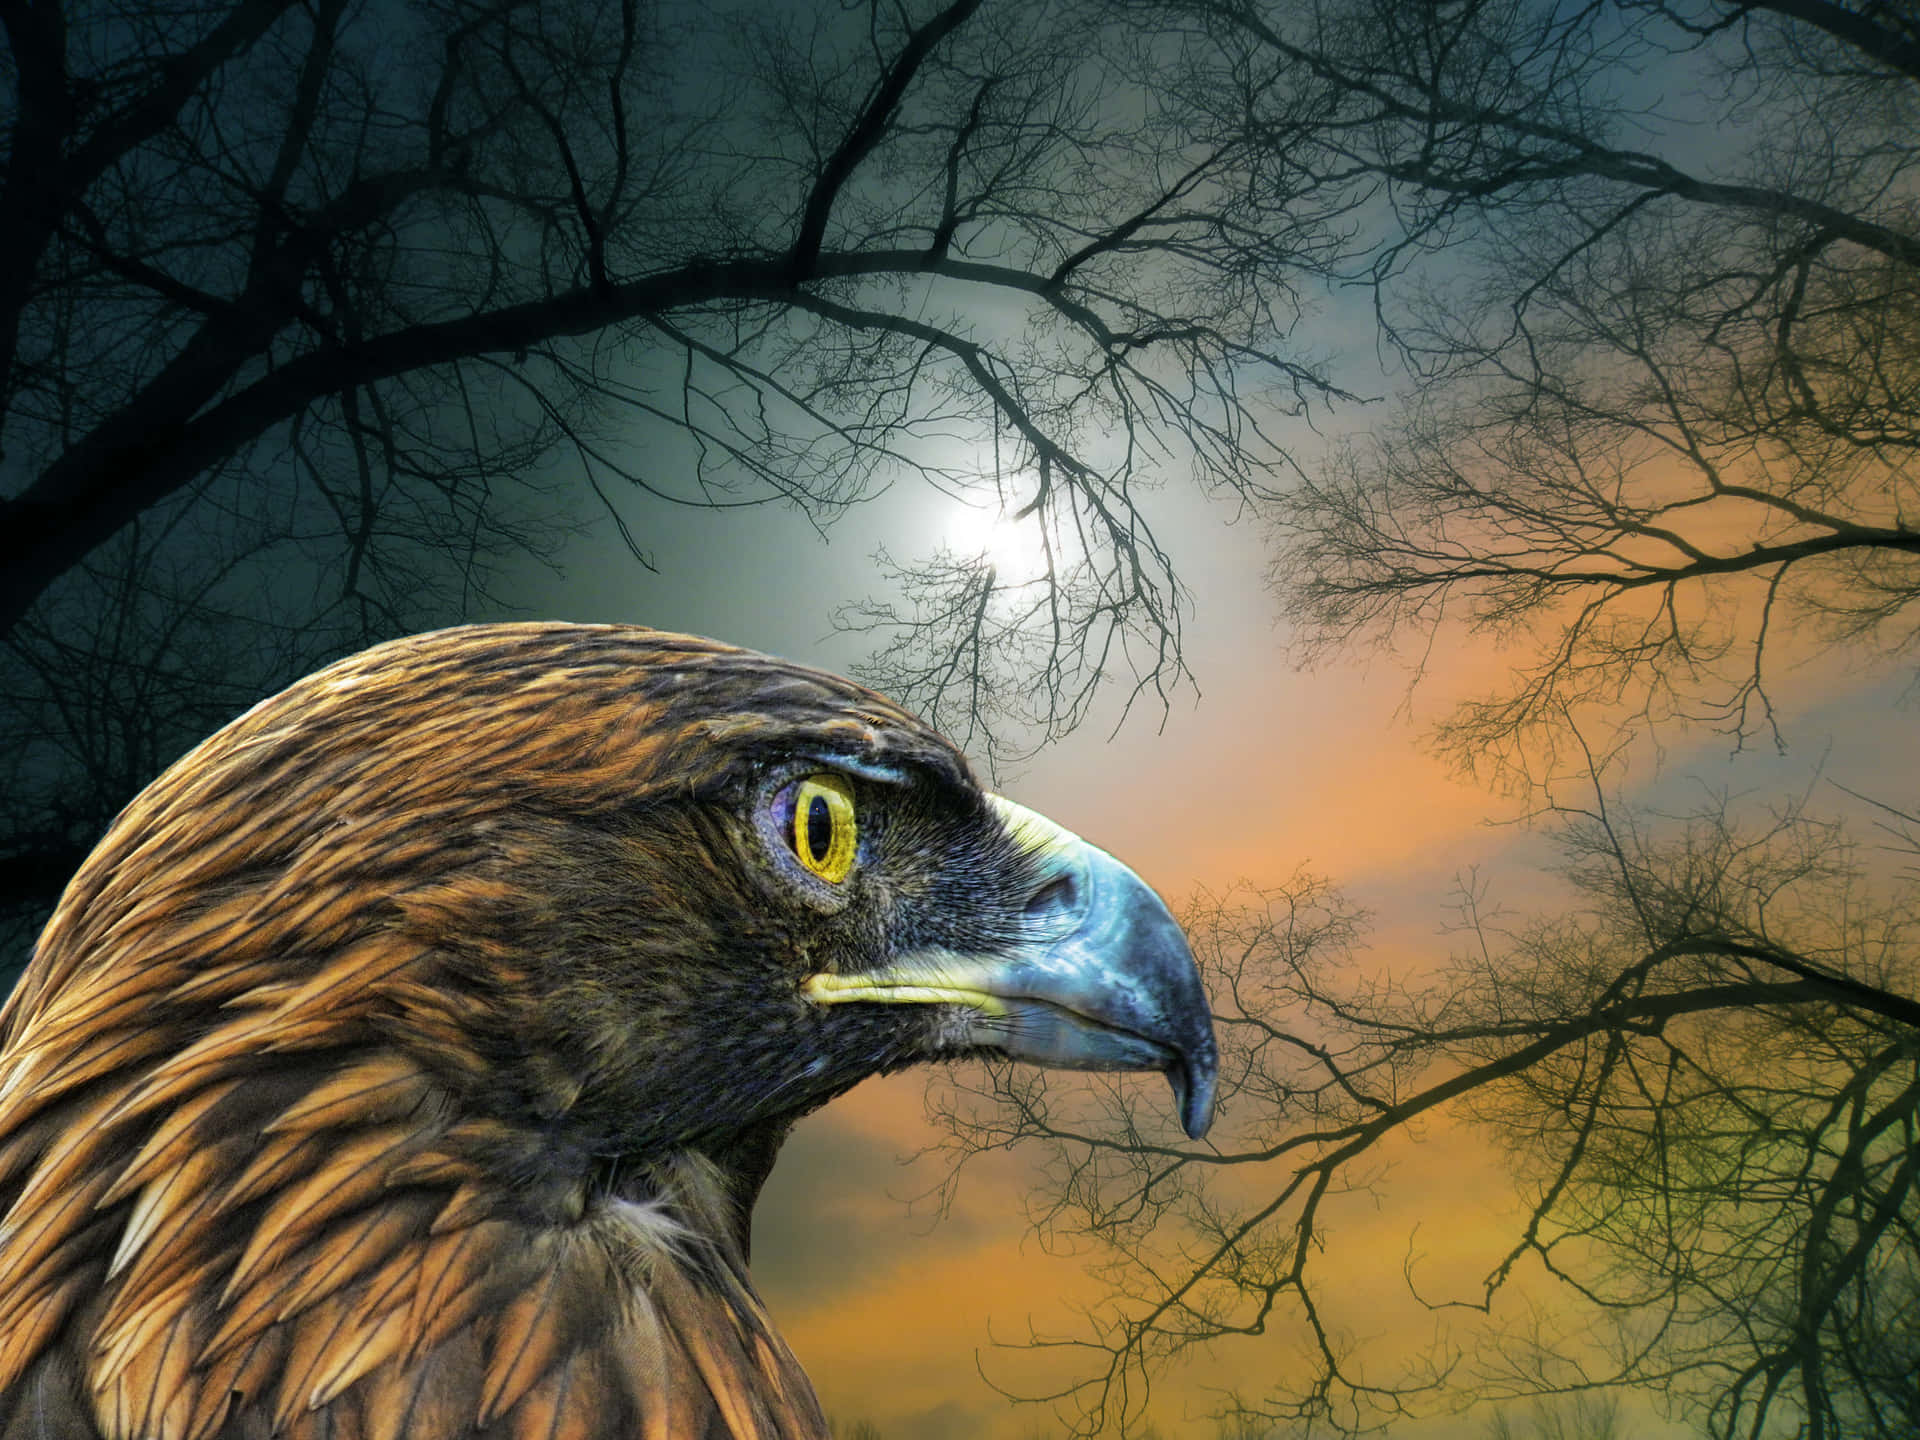 The Majestic Golden Eagle